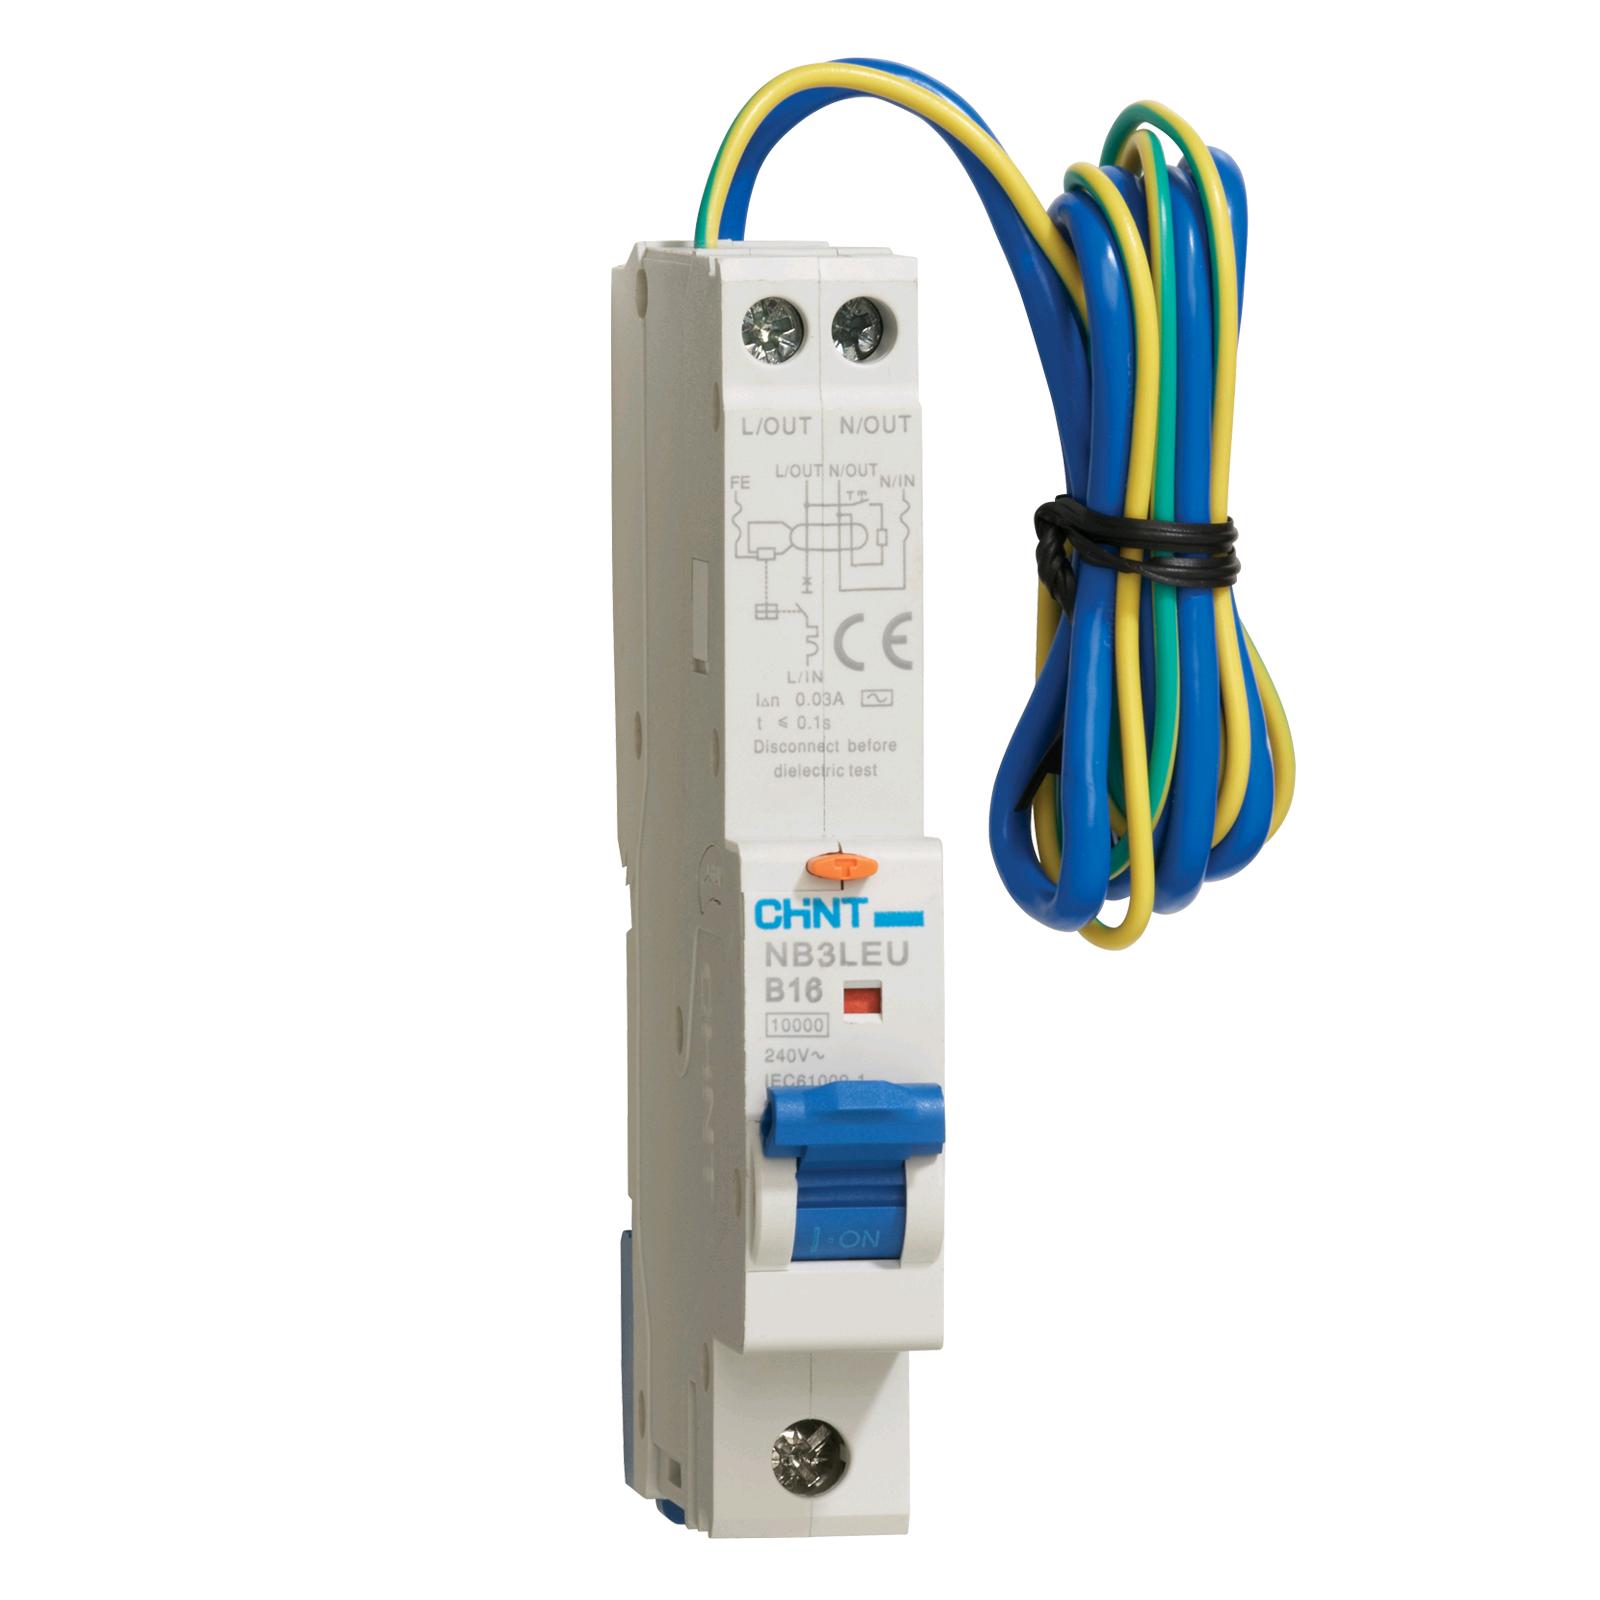 Chint 16a 30mA RCBO "B" Rated 